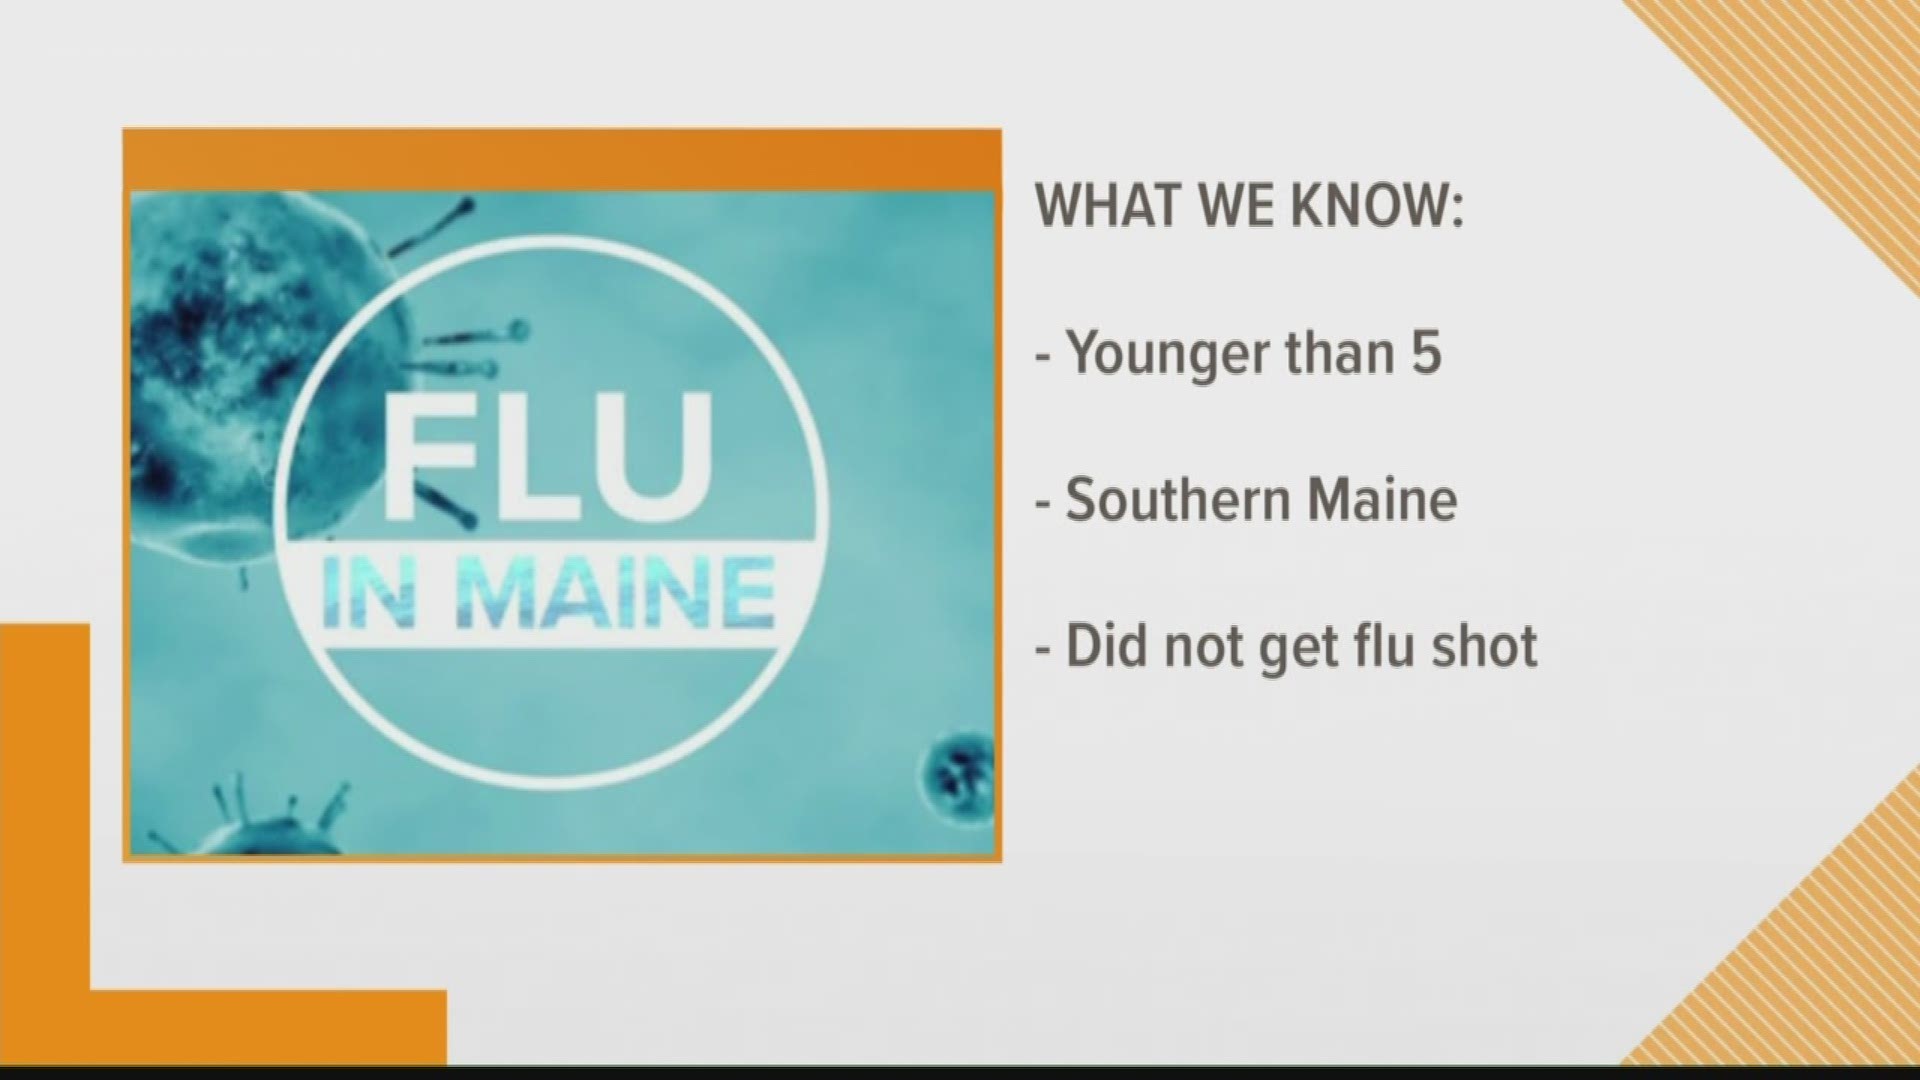 A child has died of complications from the flu here in Maine.